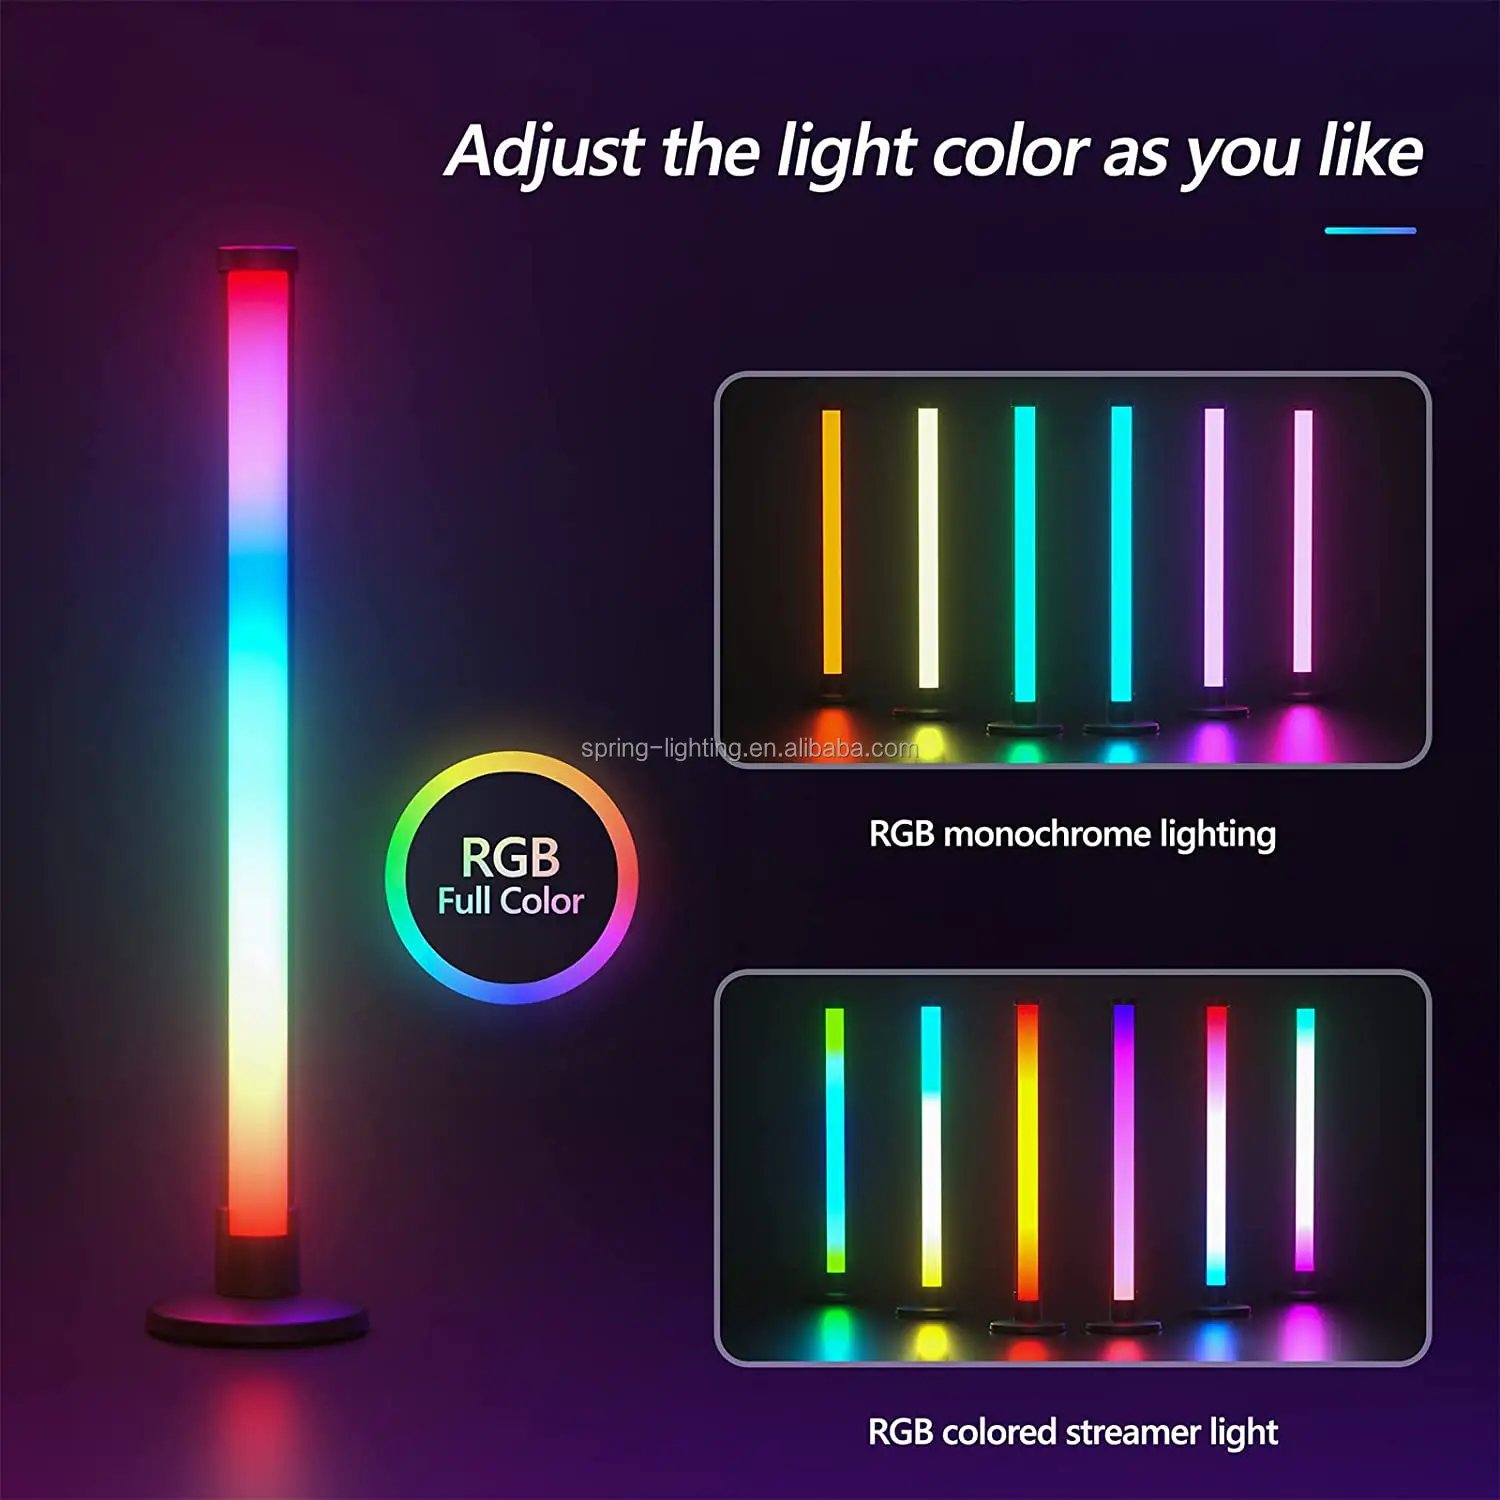 Smart LED home light color changing music sync TV computer living room background light app wireless control ambient lamp